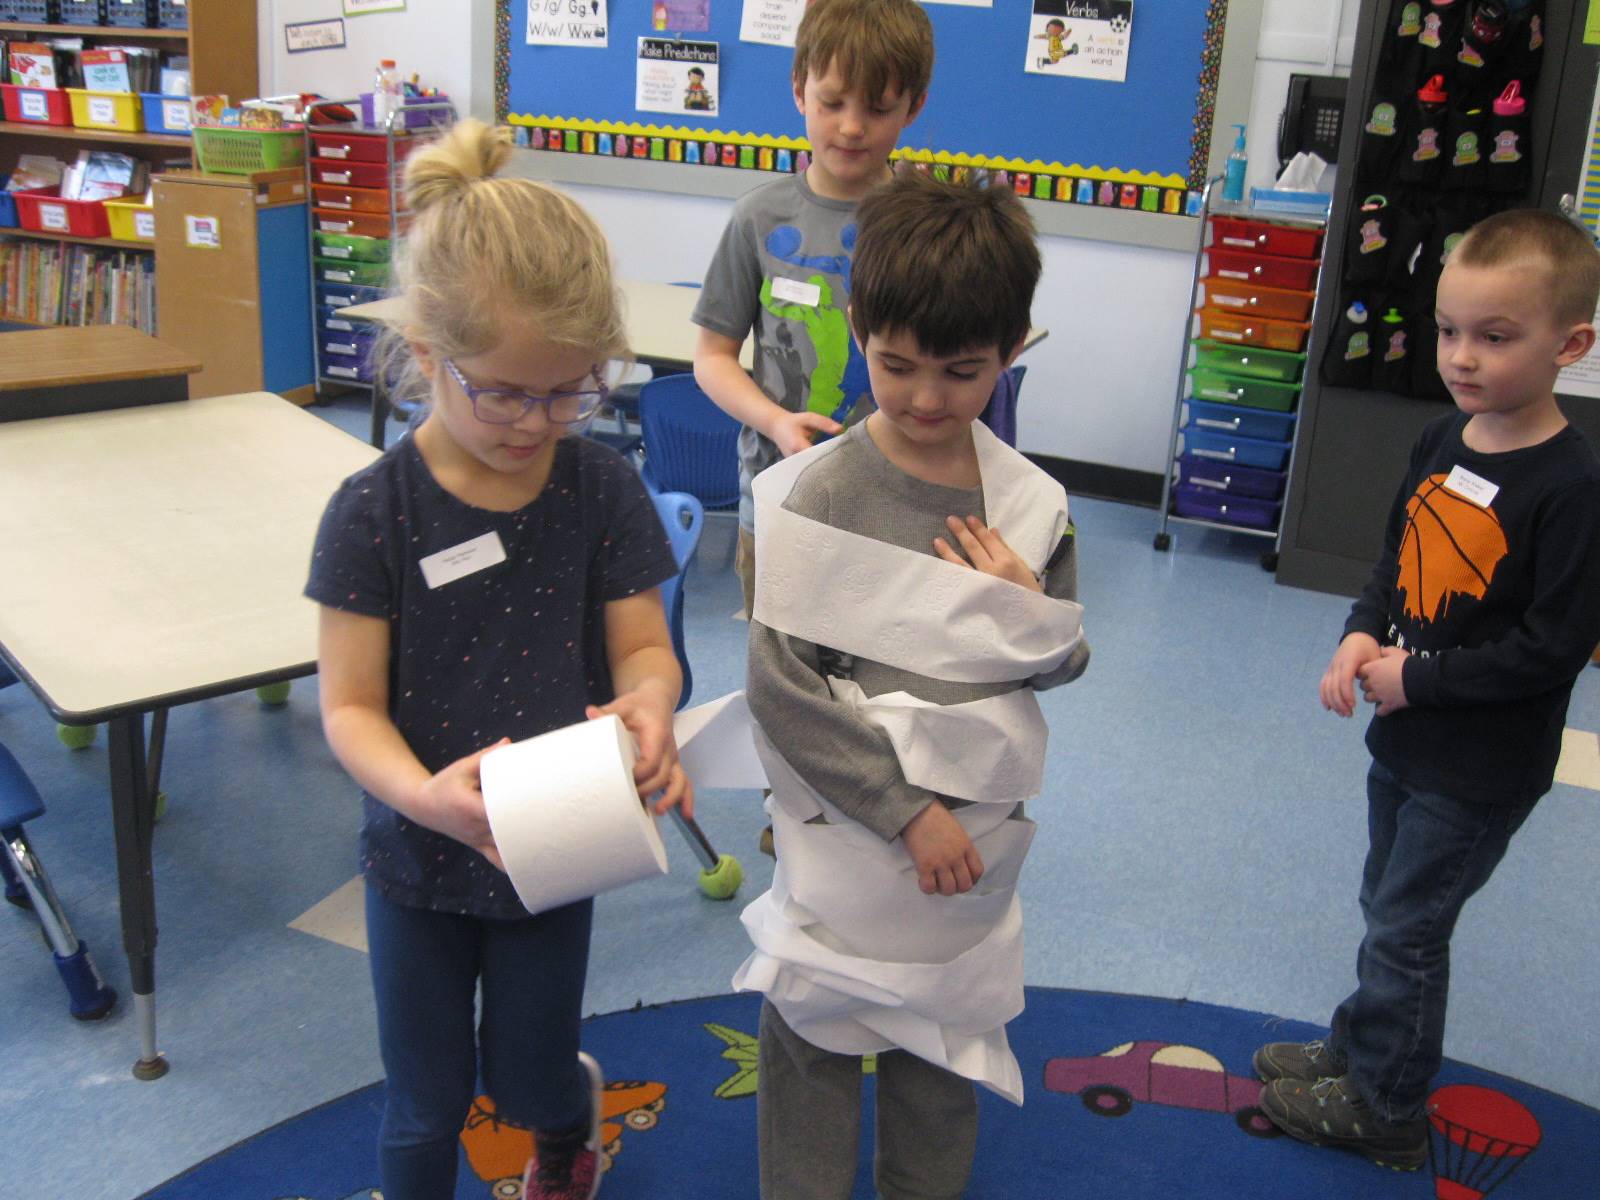  students playing a game with toilet paper